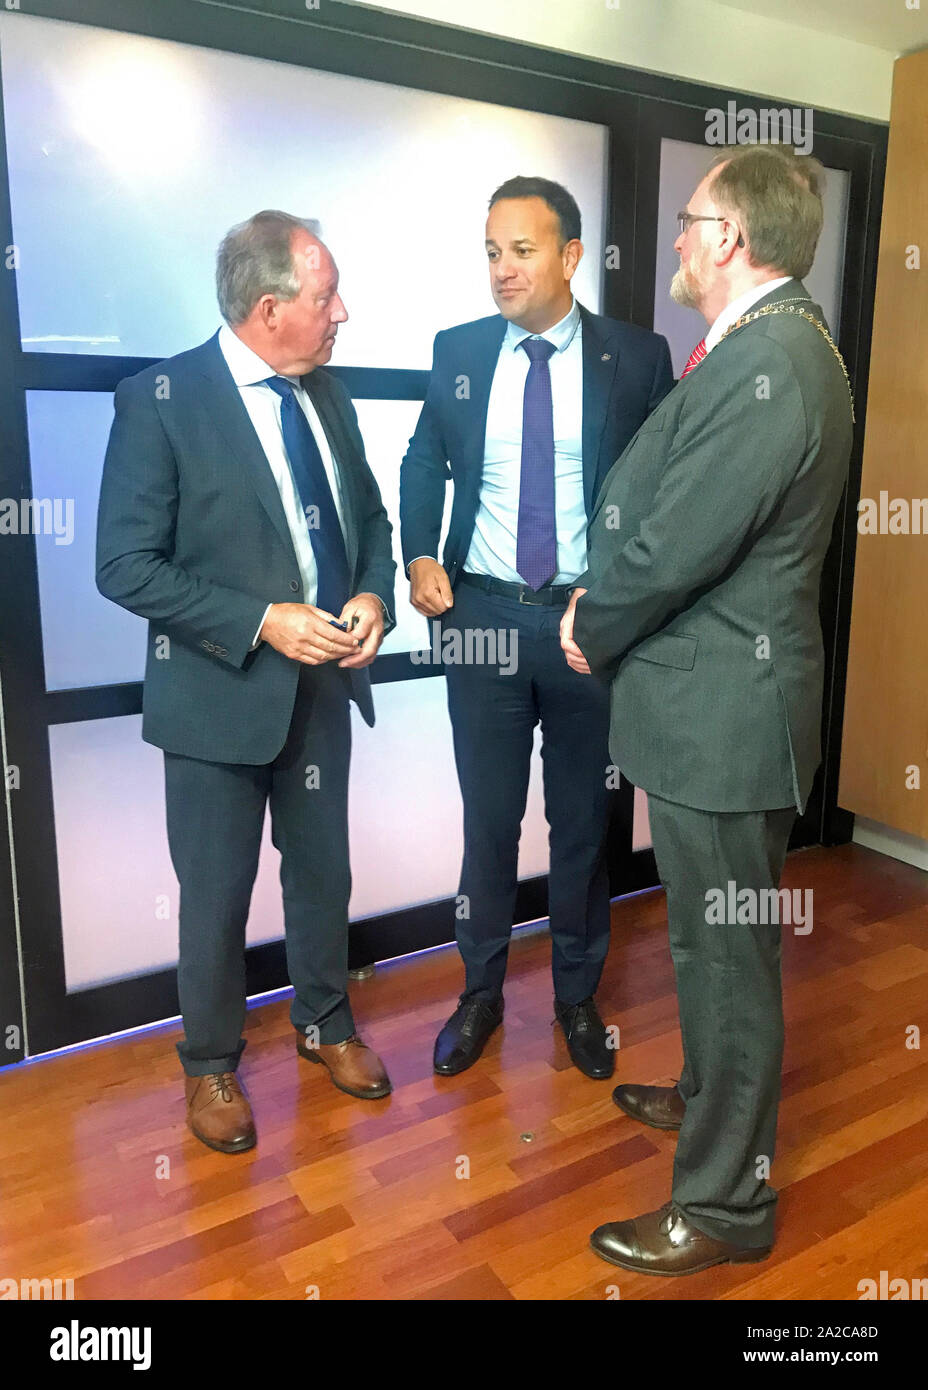 left to right) Tom Parlon, CIF (Construction Industry Federation) director  general, Taoiseach Leo Varadkar and Pat Lucey, CIF president attending the  CIF annual conference in Dublin, where they have been warned to